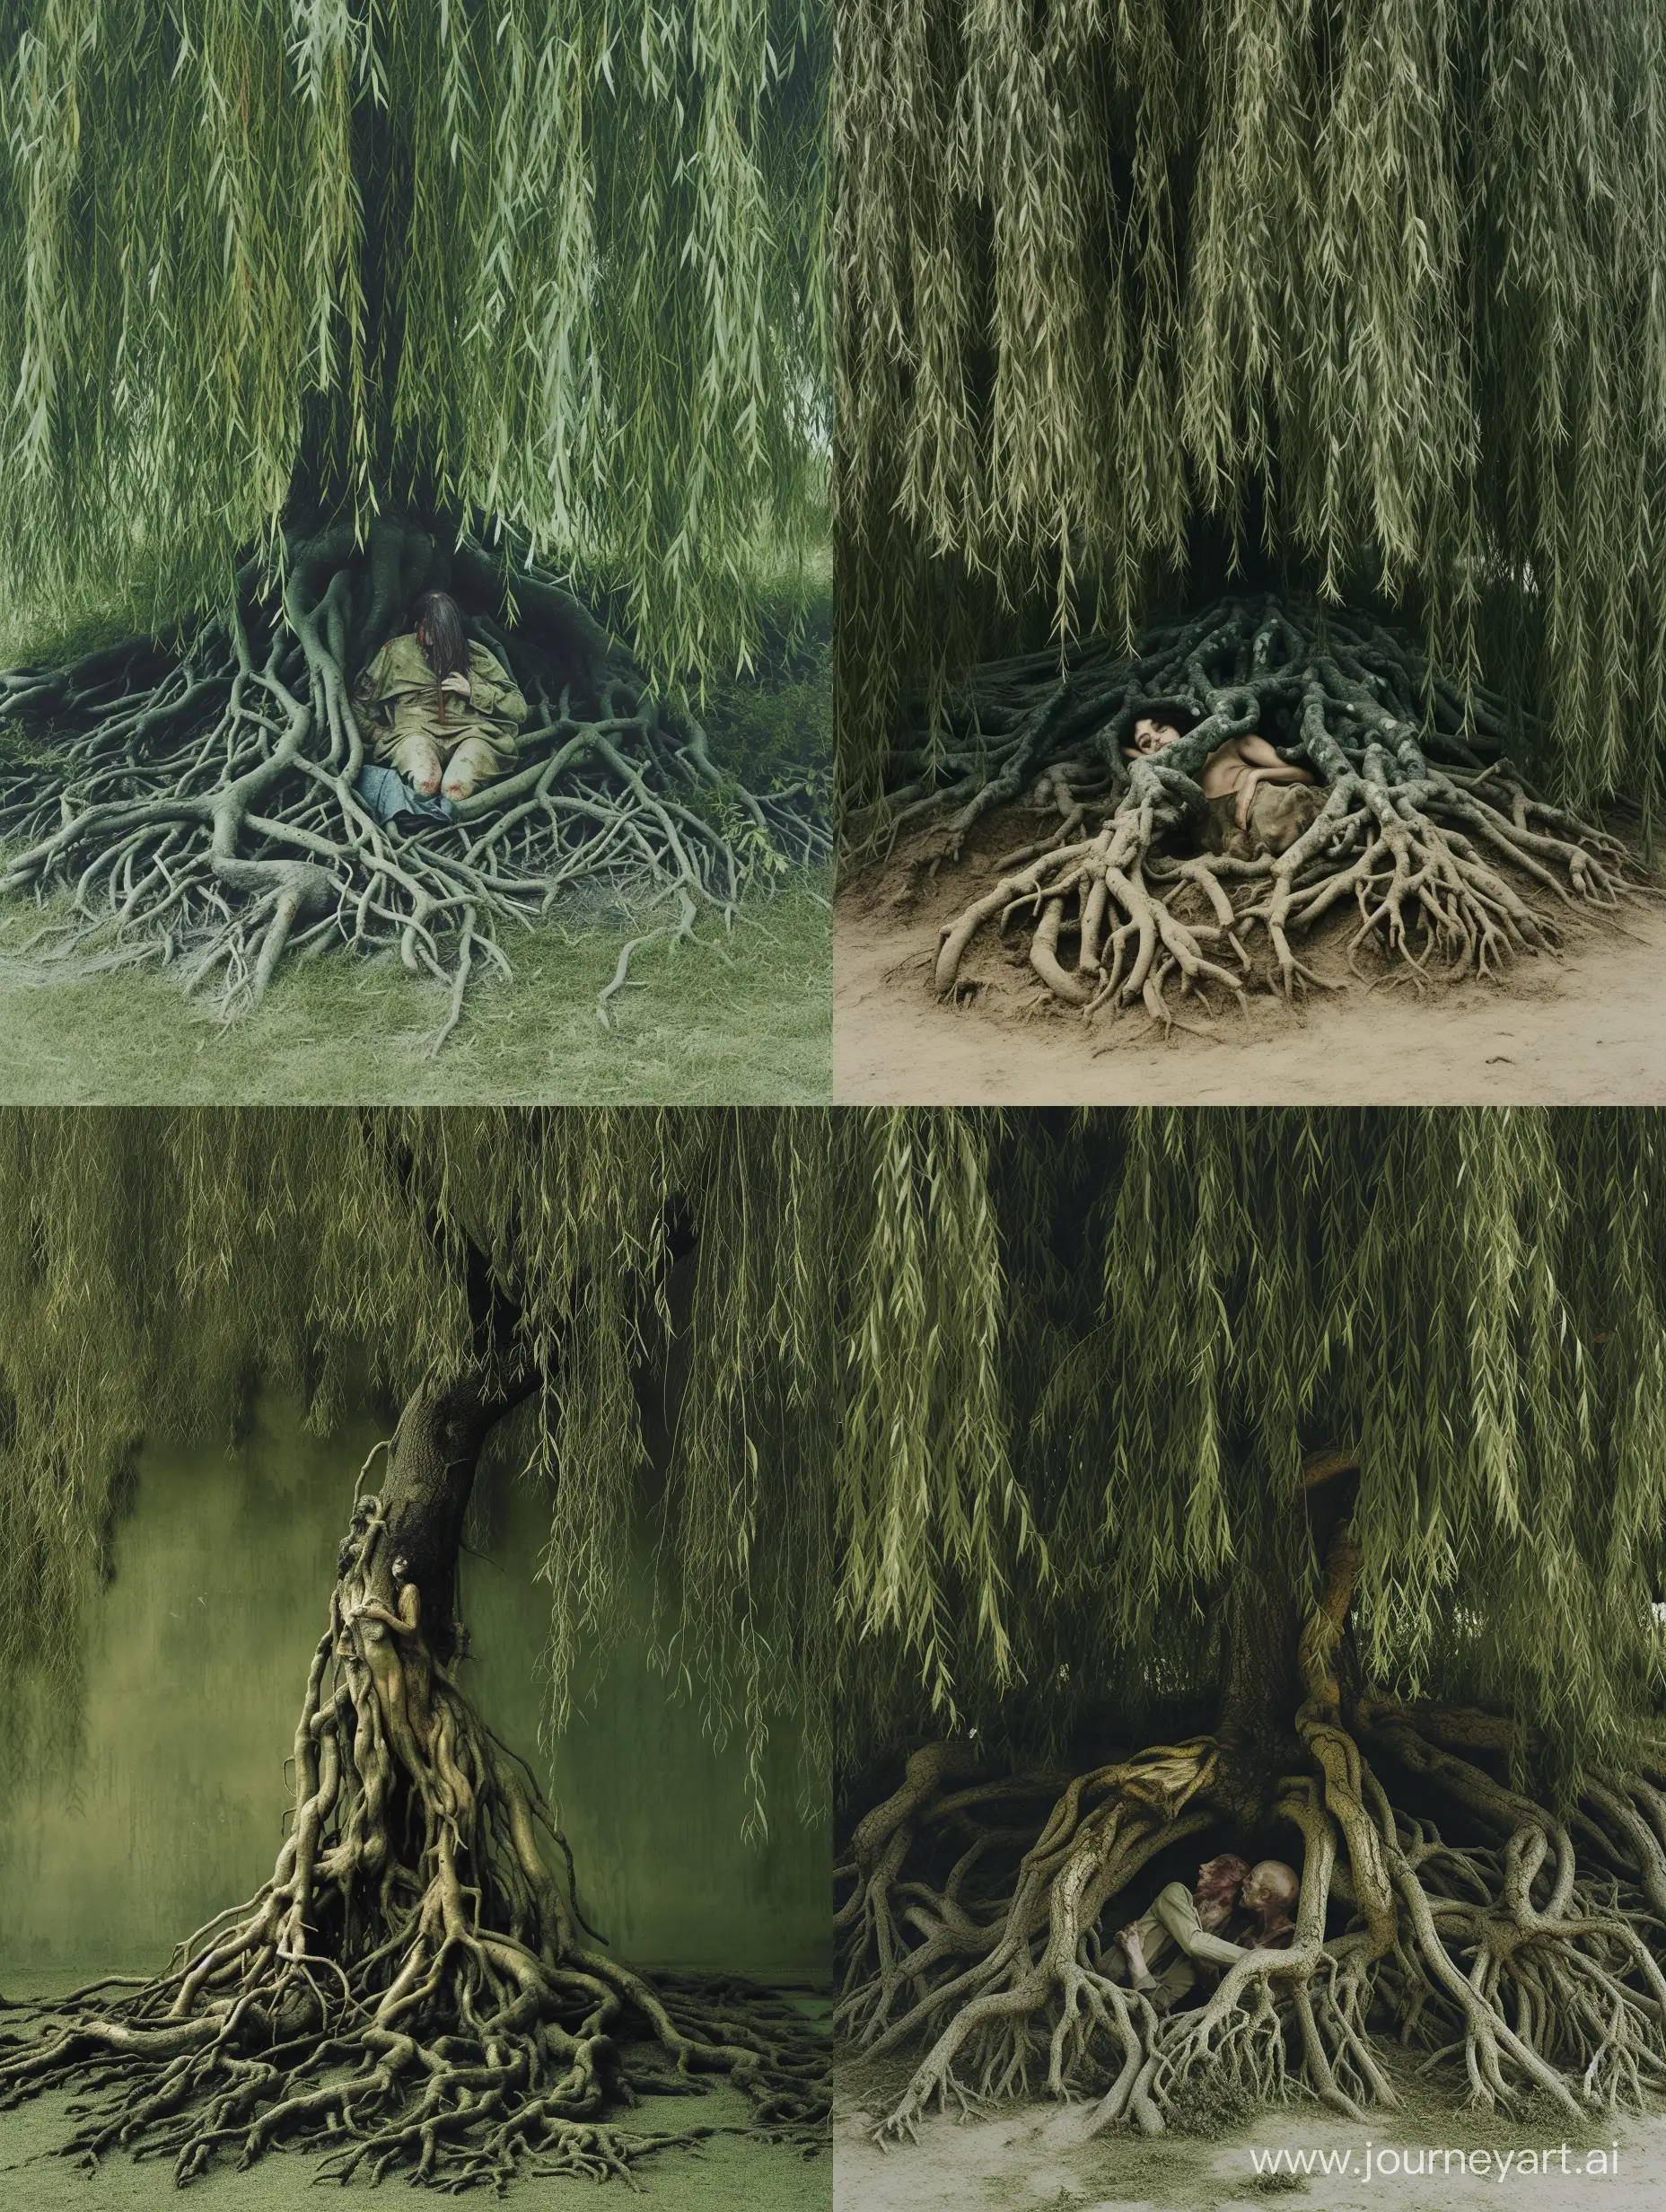 A color photo of a weeping willow tree,
its graceful branches cascading downward,
creating a veil of greenery and melancholy.

Large exposed roots sprawl across the ground,
twisting and intertwining with an eerie beauty.

Within the tangled roots, two decaying bodies,
a man and a woman, locked in a loving embrace,
their earthly form slowly returning to the earth.

The tree stands as a solemn witness,
a guardian of their eternal bond,
as nature reclaims their mortal remains.

The weeping willow's leaves flutter in the breeze,
as if shedding tearful whispers for the departed,
creating an atmosphere of sorrow and contemplation.

This haunting image captures the fragility of life,
the ephemeral nature of love,
and the inevitable embrace of decay.

Unlikely collaborators:
Tim Burton, the filmmaker known for his dark and whimsical aesthetics,
Francesca Woodman, the photographer exploring themes of death and self-expression,
Thom Yorke, the musician evoking emotions through haunting melodies,
Rick Owens, the fashion designer blending darkness and romanticism,
Guillermo del Toro, the visionary storyteller delving into the realms of fantasy and horror. 